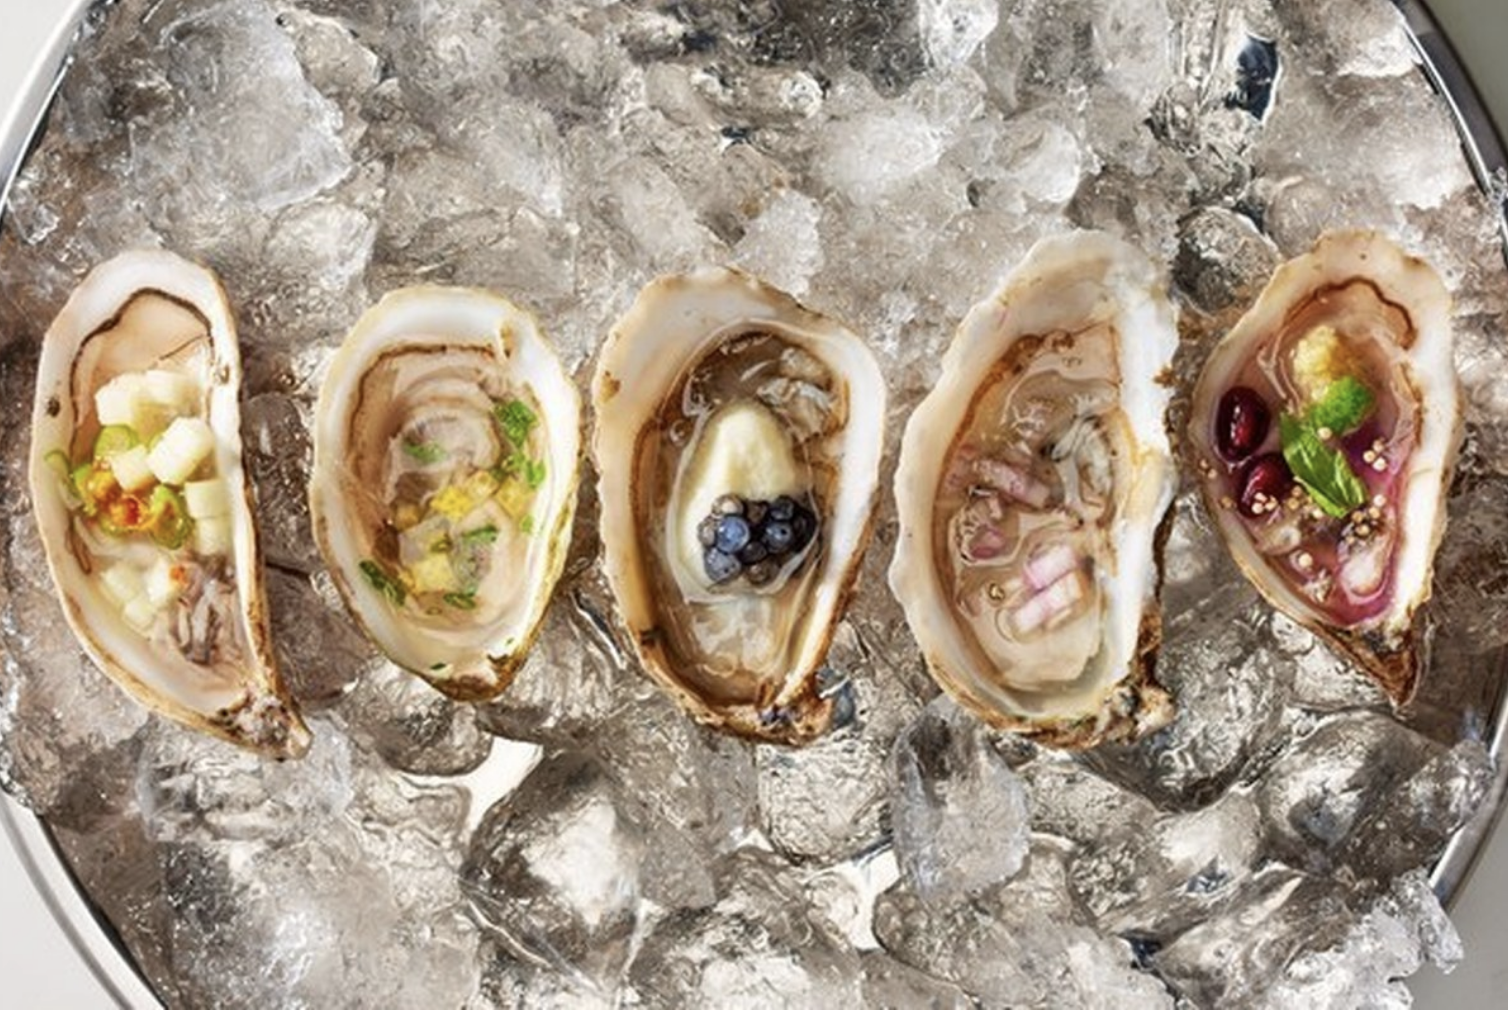 <b>7X7 BAY AREA</b> The Best Spots to Slurp Oysters in San Francisco (From Cheap to Luxe)